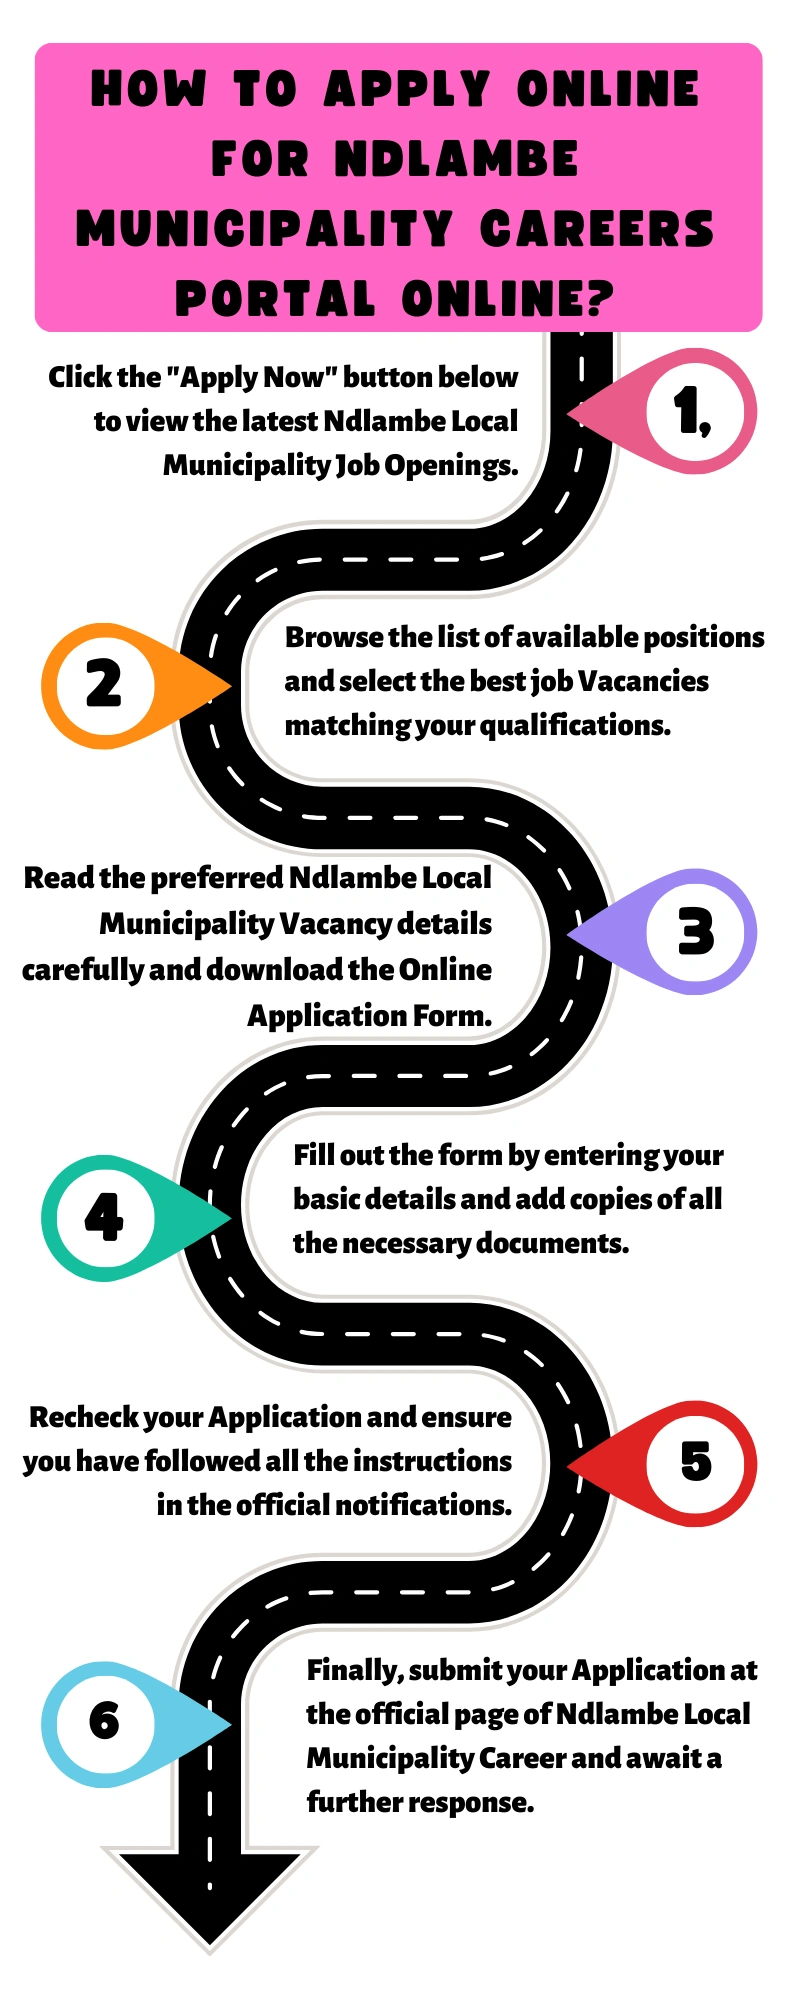 How to Apply online for Ndlambe Municipality Careers Portal Online?